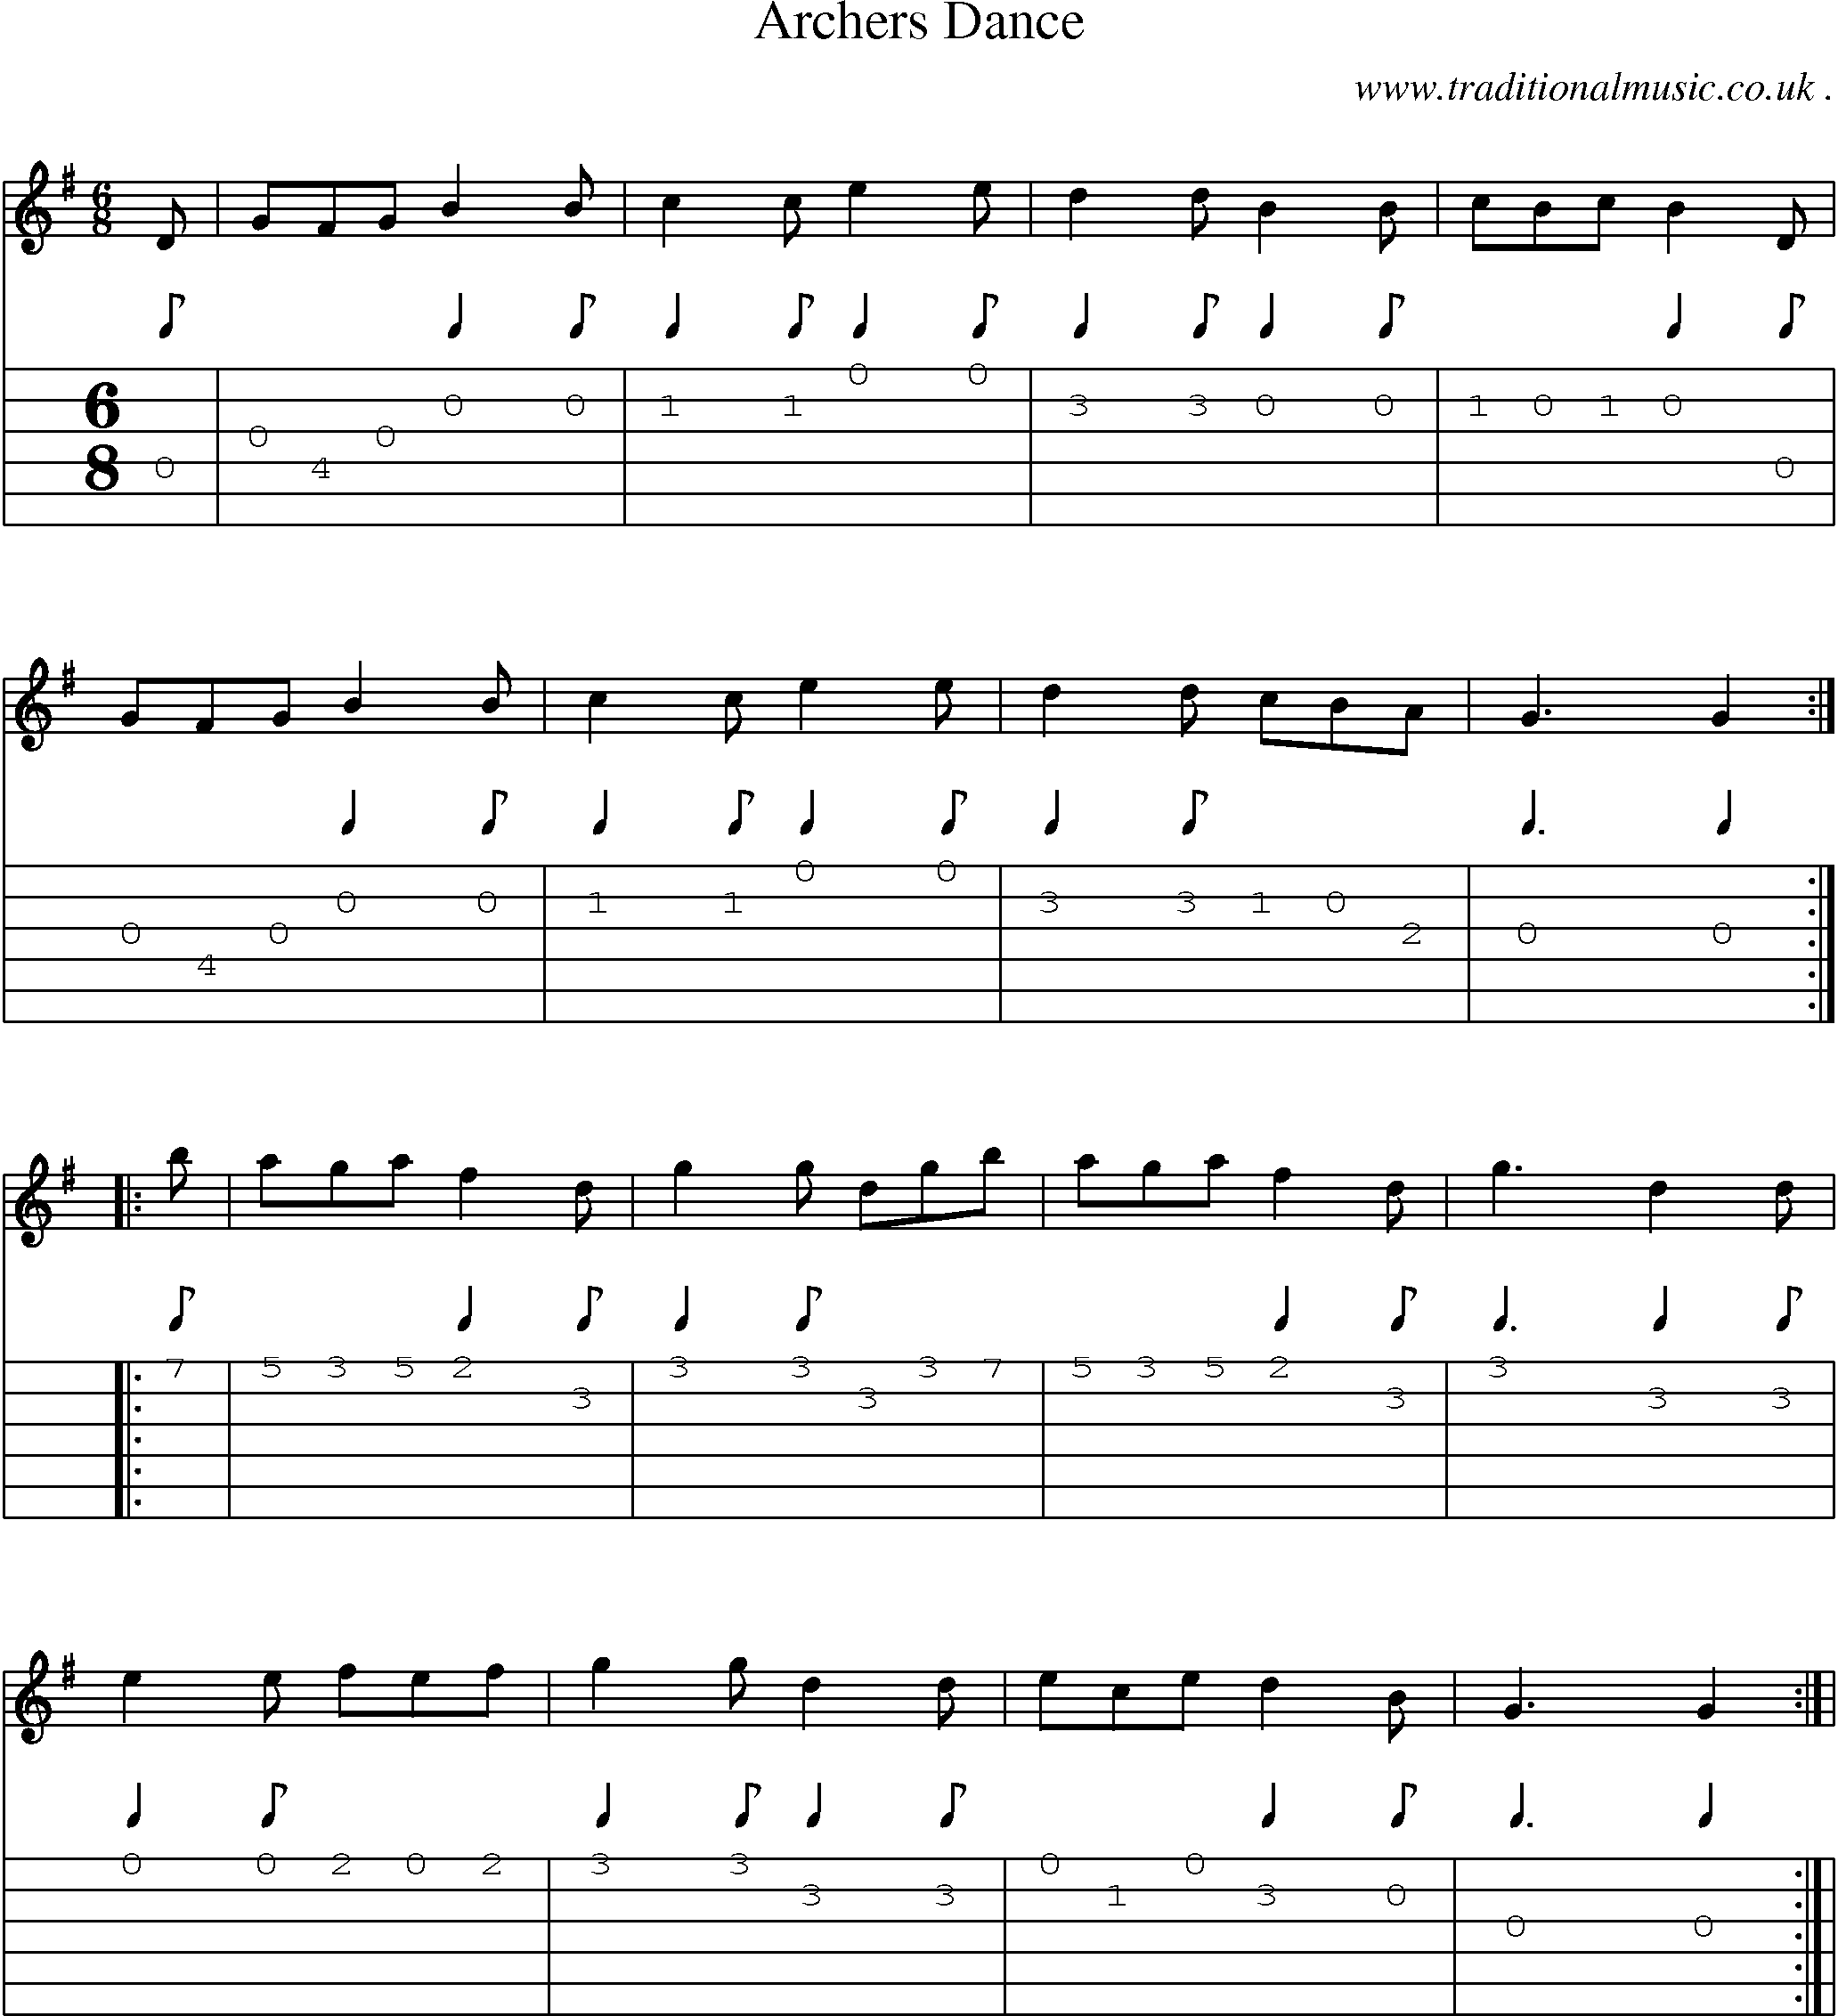 Sheet-Music and Guitar Tabs for Archers Dance